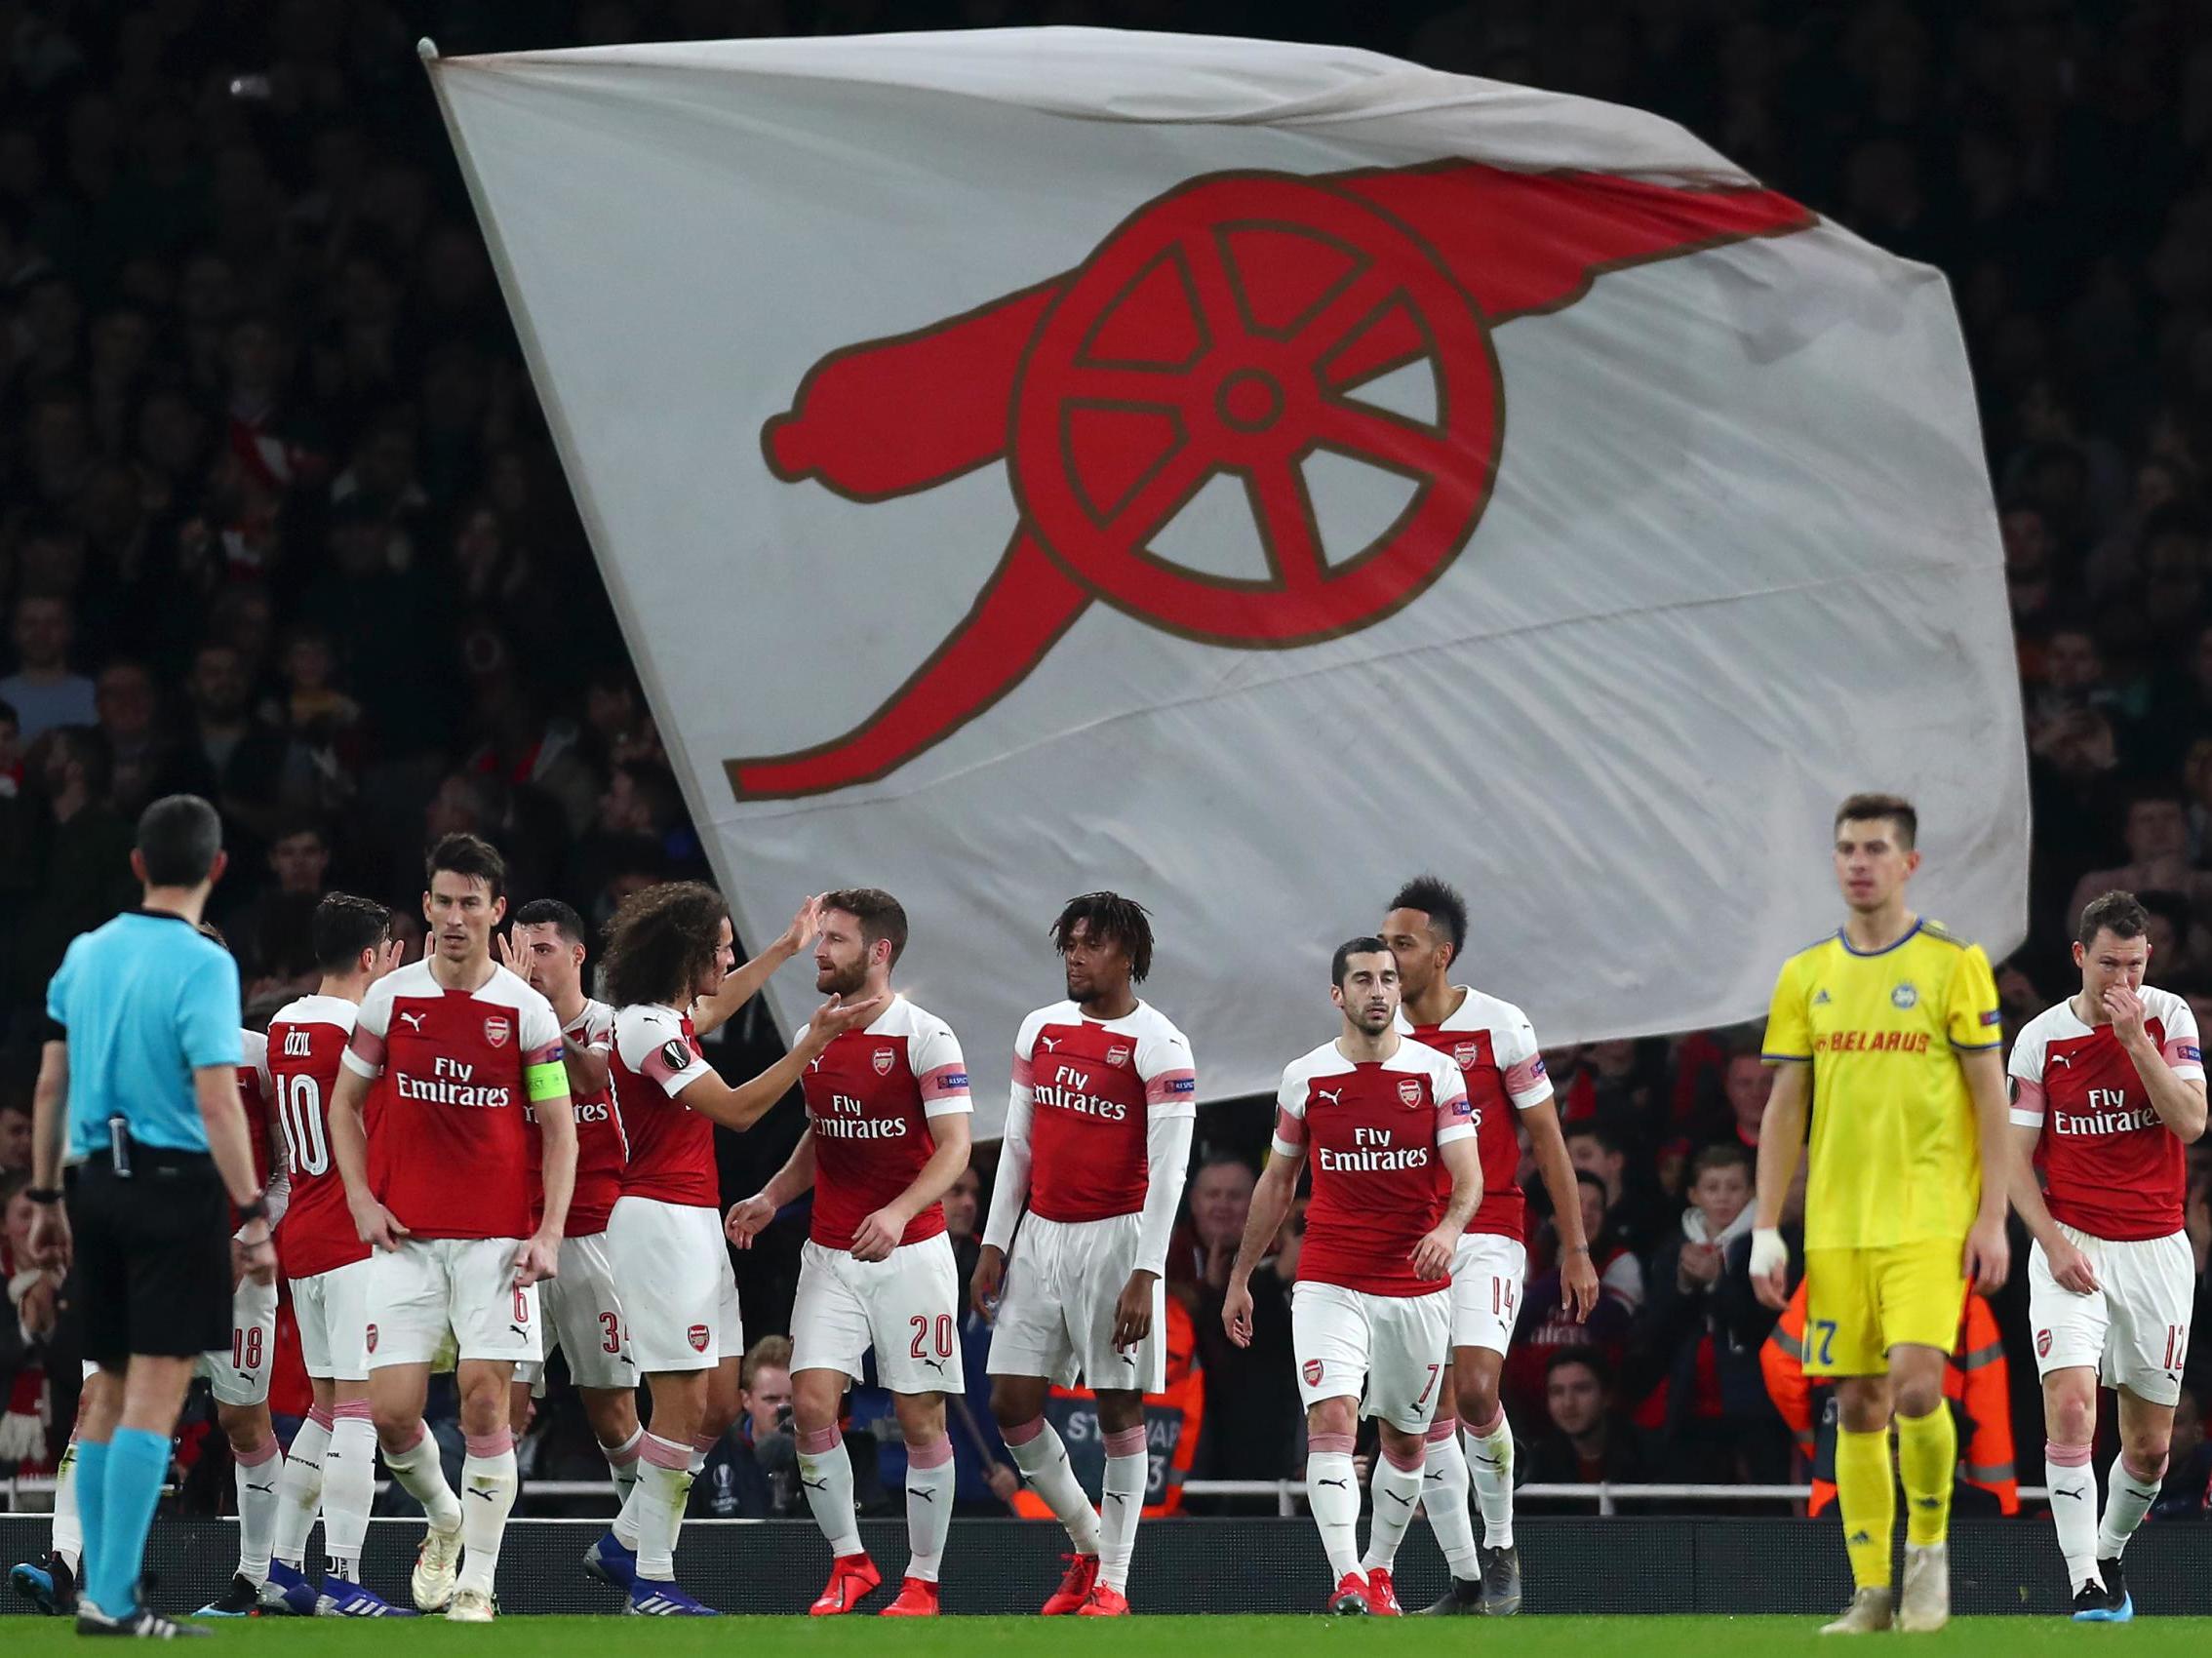 Arsenal failed to inspire or excite with another low-wattage display